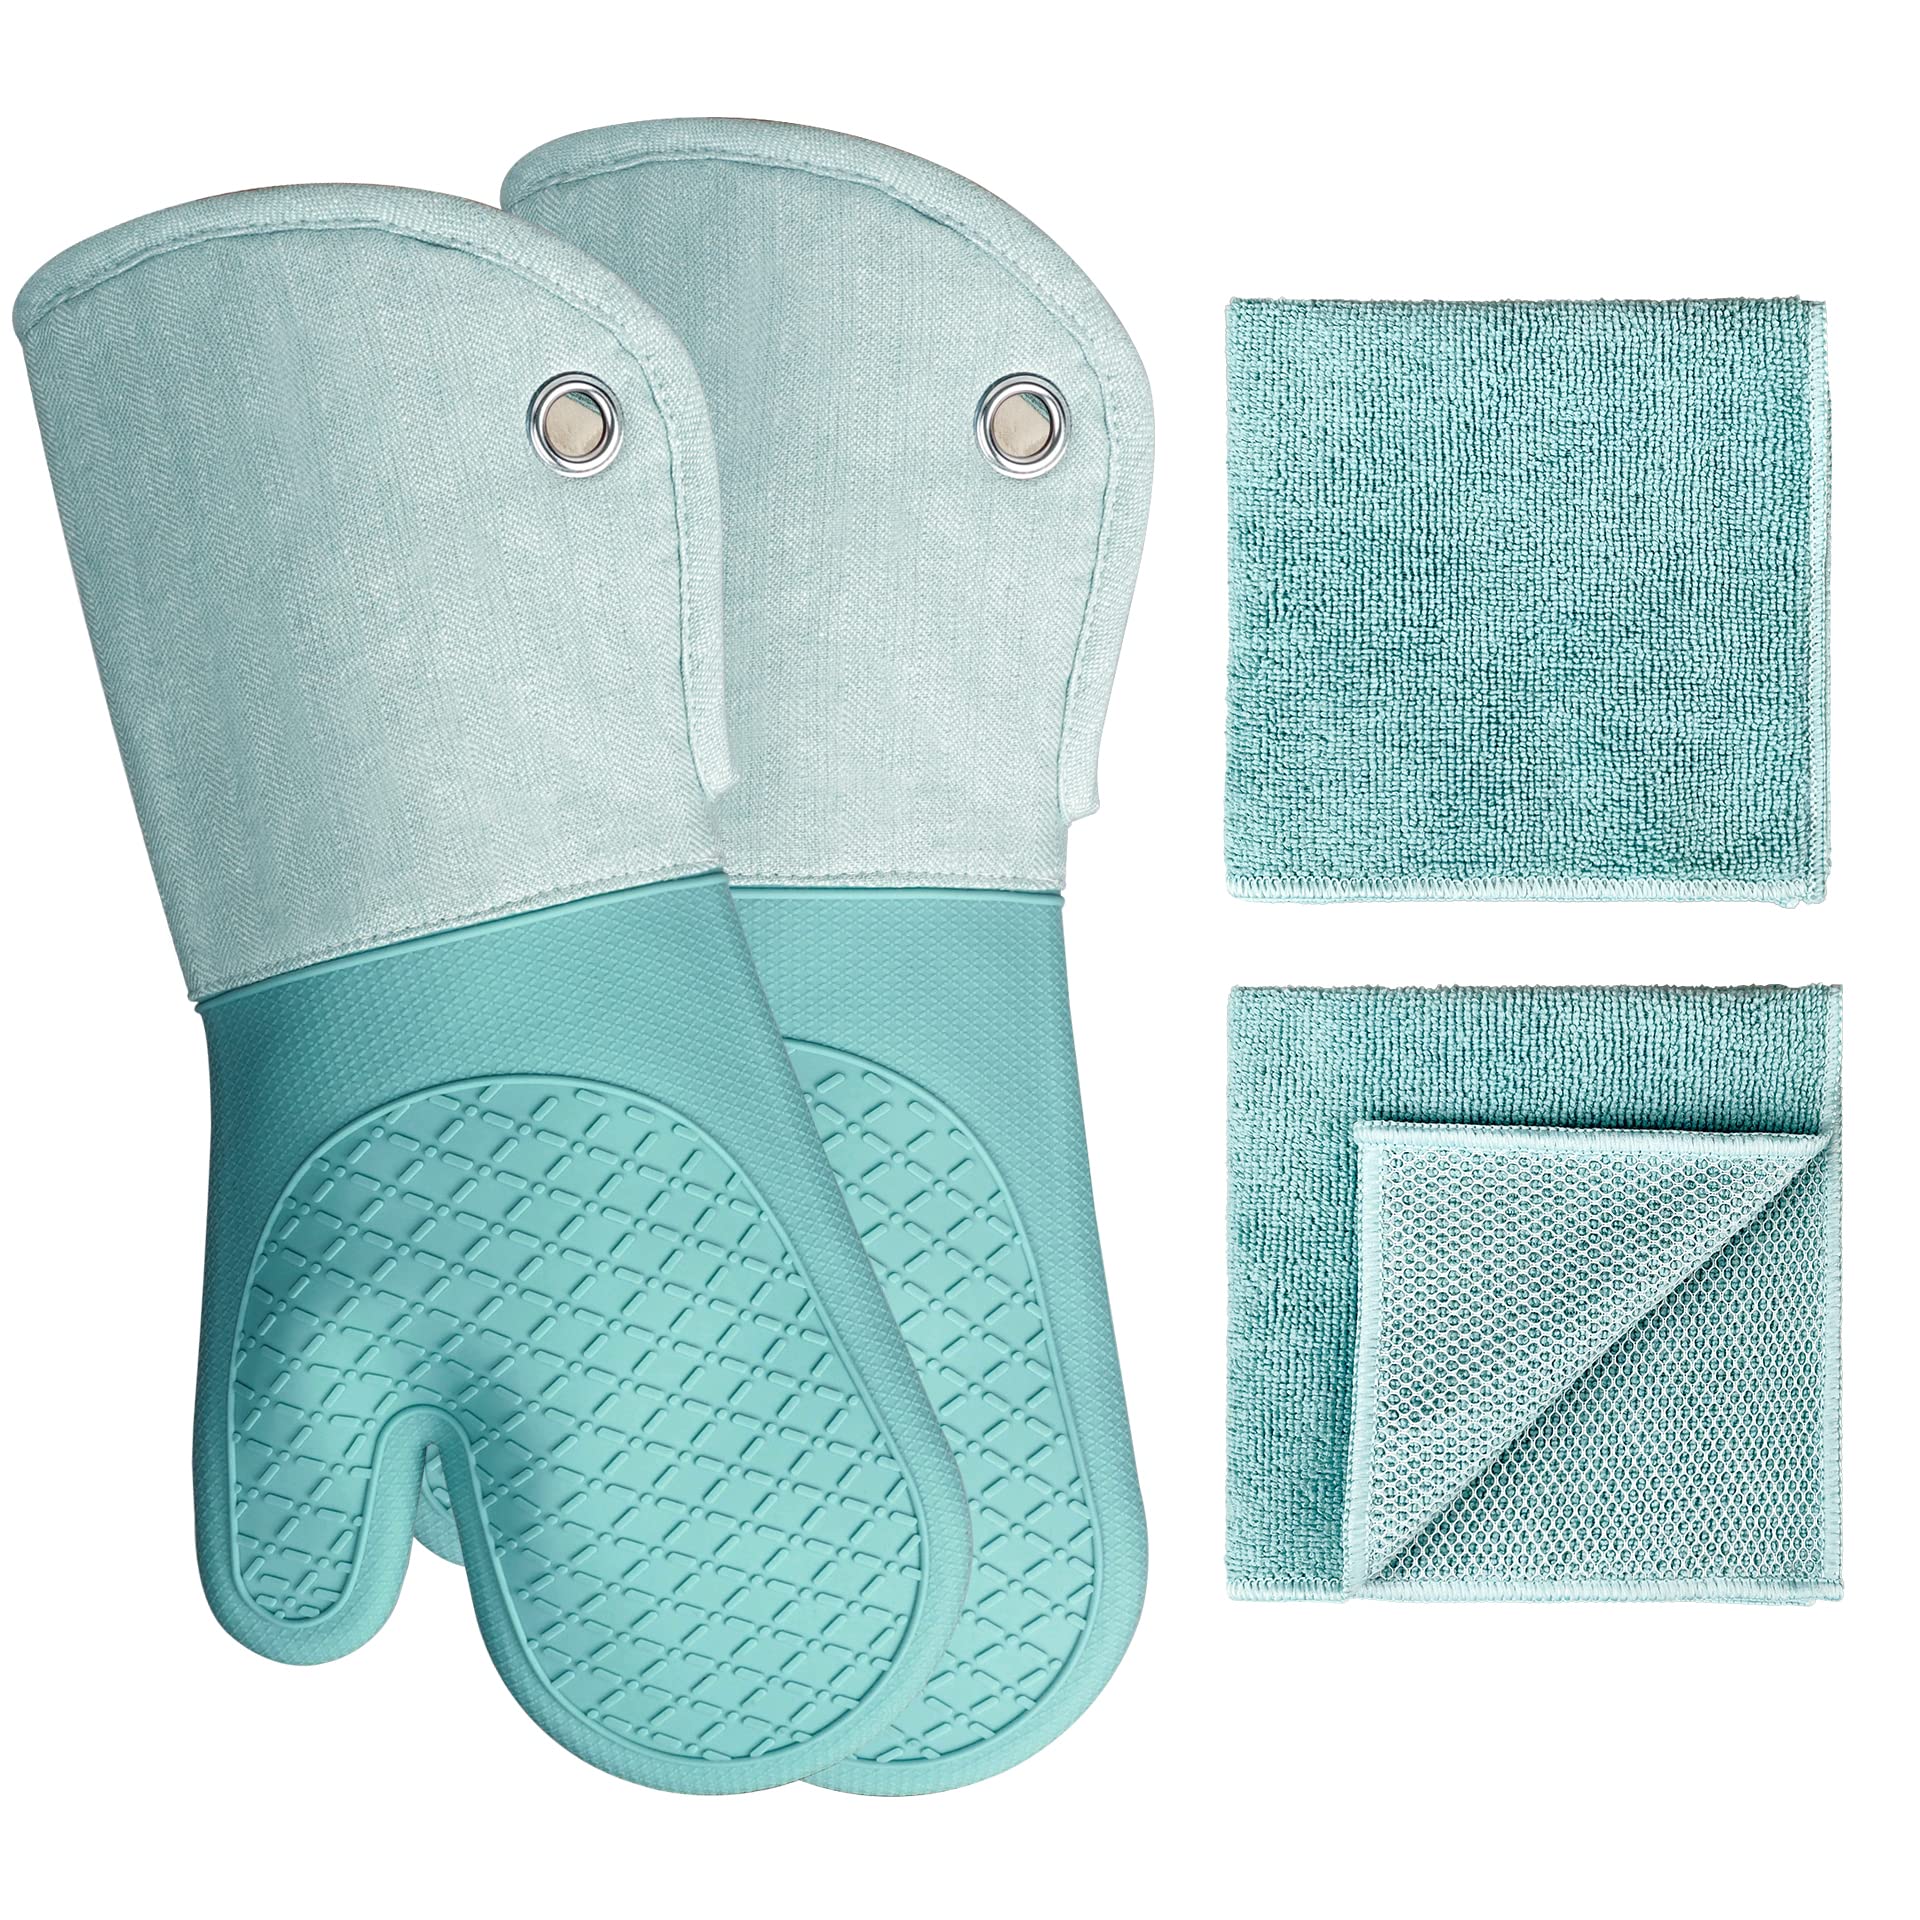 Book Cover Professional Microwave Silicone Oven Mitts Yarn-Dyed 1 Pair and Kitchen Towels 2 Pcs, Kitchen Lines Set for Heat Resistant with 500 Degrees, Kitchen Gloves Pot Holder for BBQ Cooking (Light Blue)